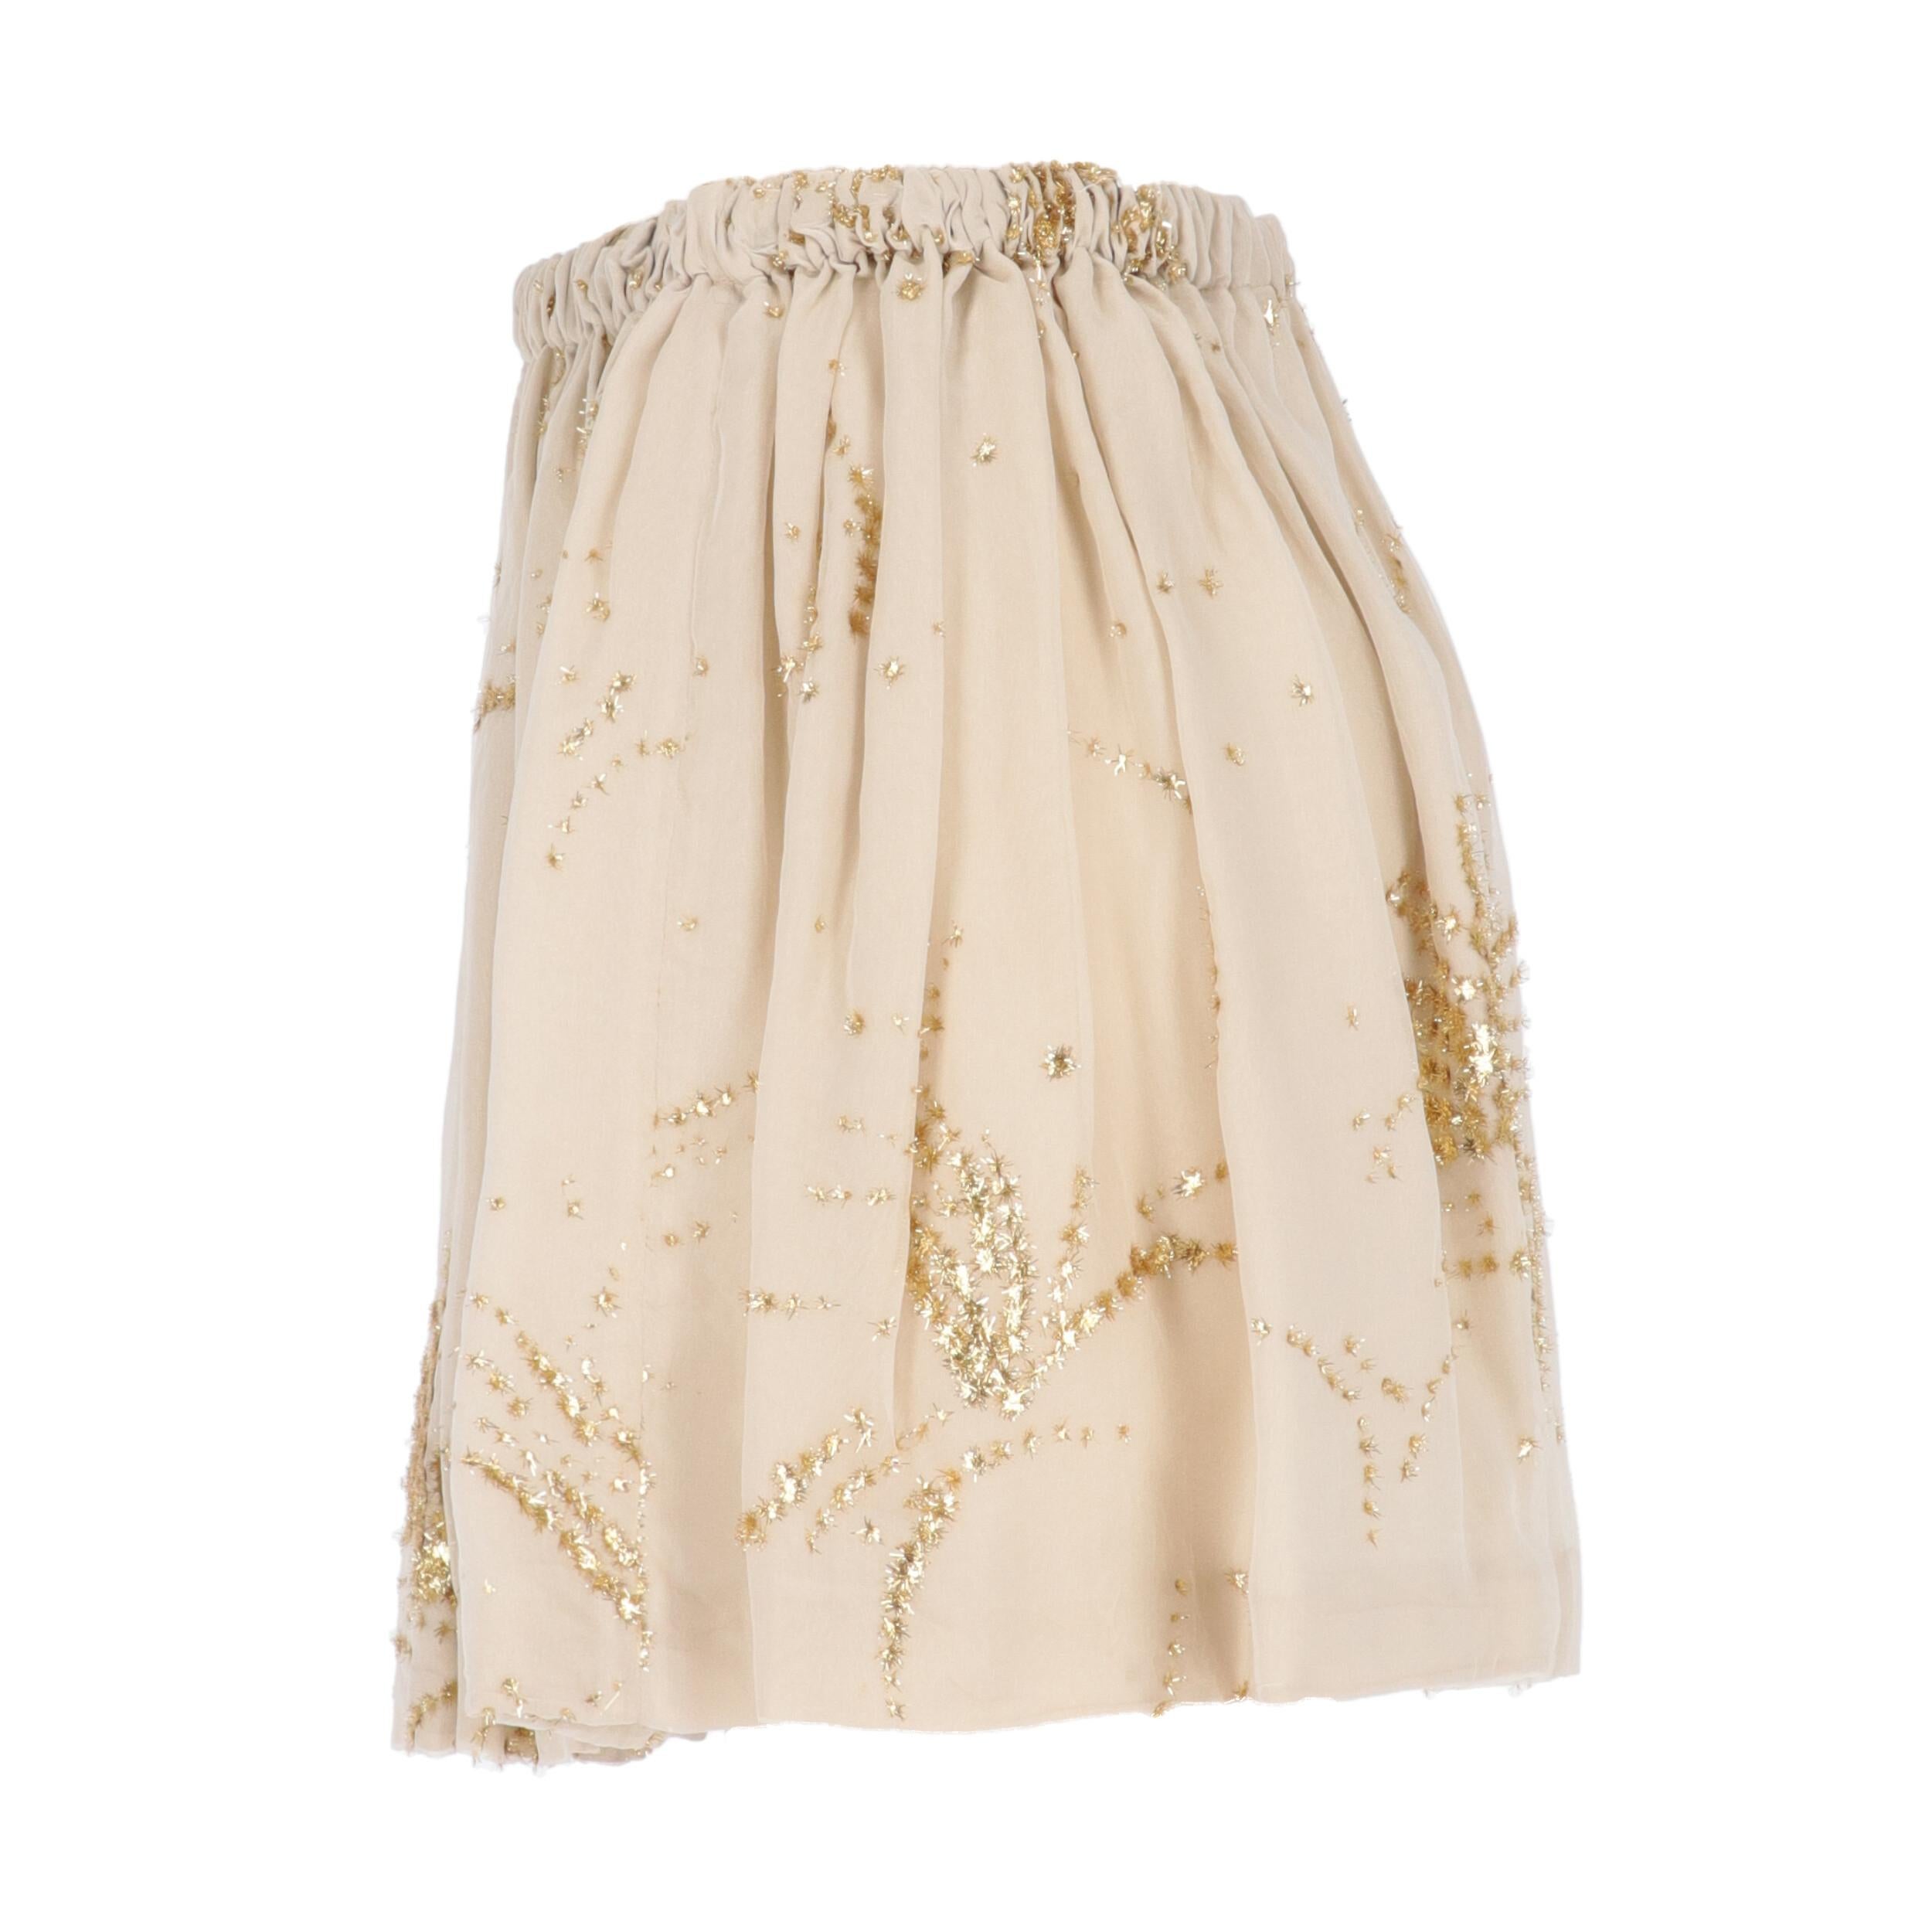 Miu Miu ivory polyester miniskirt with golden applications and elasticated waist.
Years: 2000s

Made in Italy

Size: 44 IT



Flat measurements

Height: 38 cm
Waist: 35 cm 